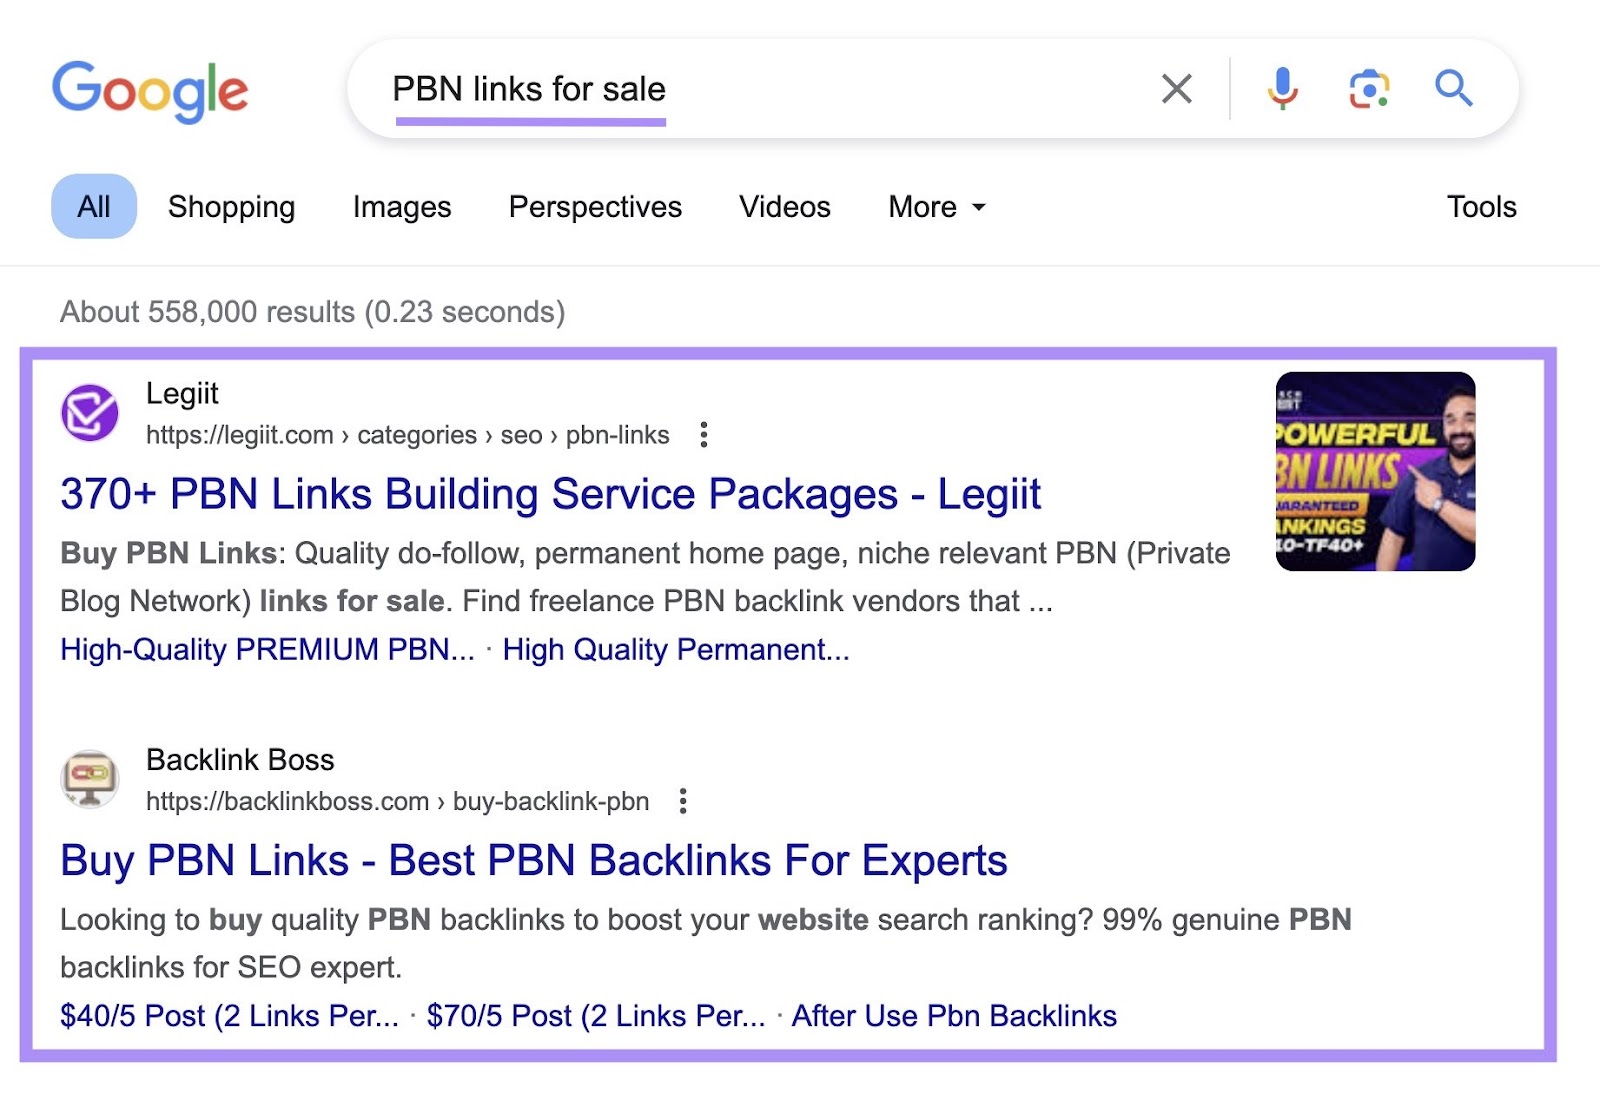 Google search for “PBN links for sale”